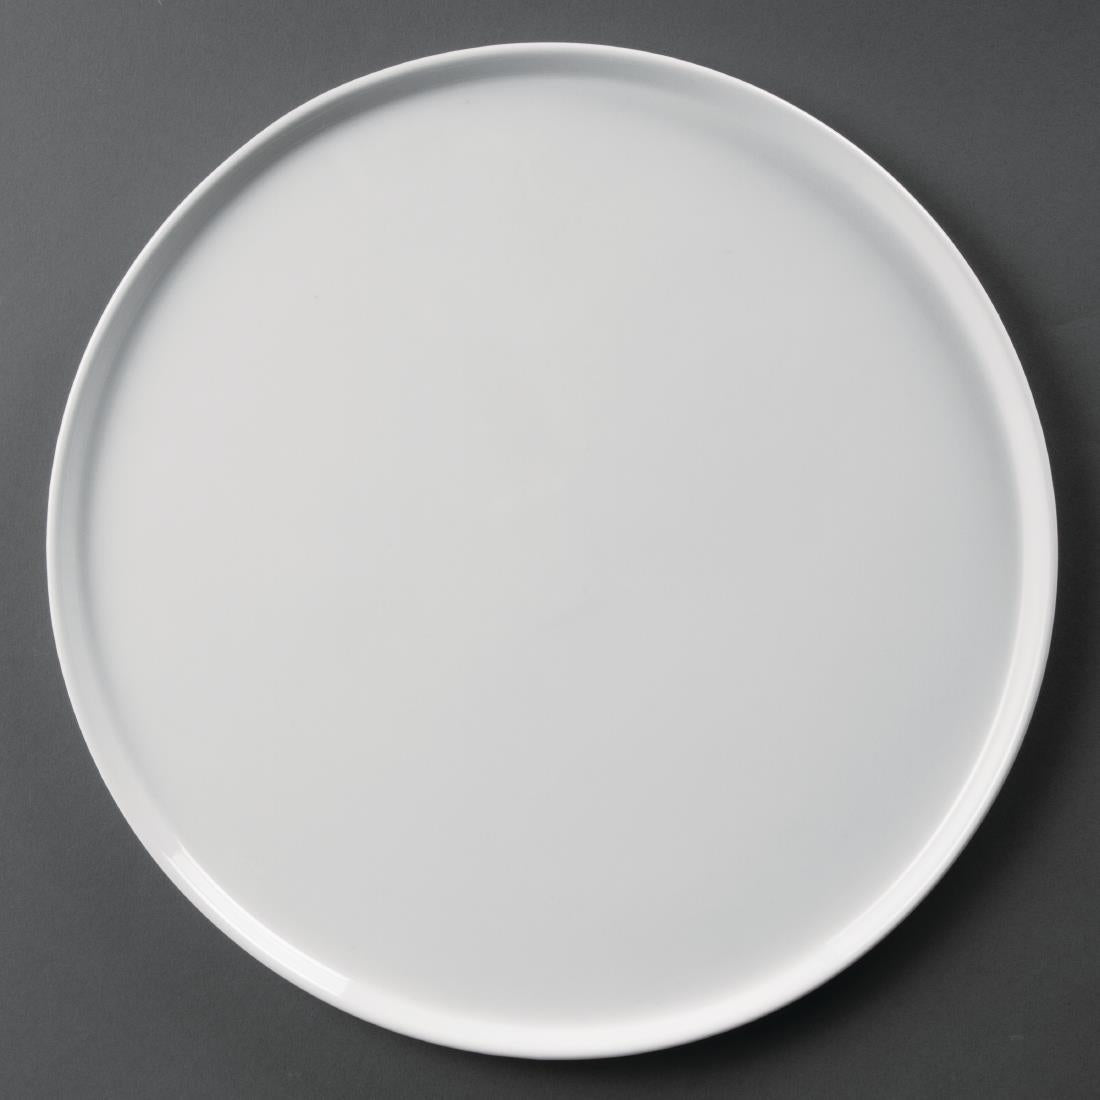 CD723 Olympia Whiteware Pizza Plates 330mm (Pack of 4) JD Catering Equipment Solutions Ltd